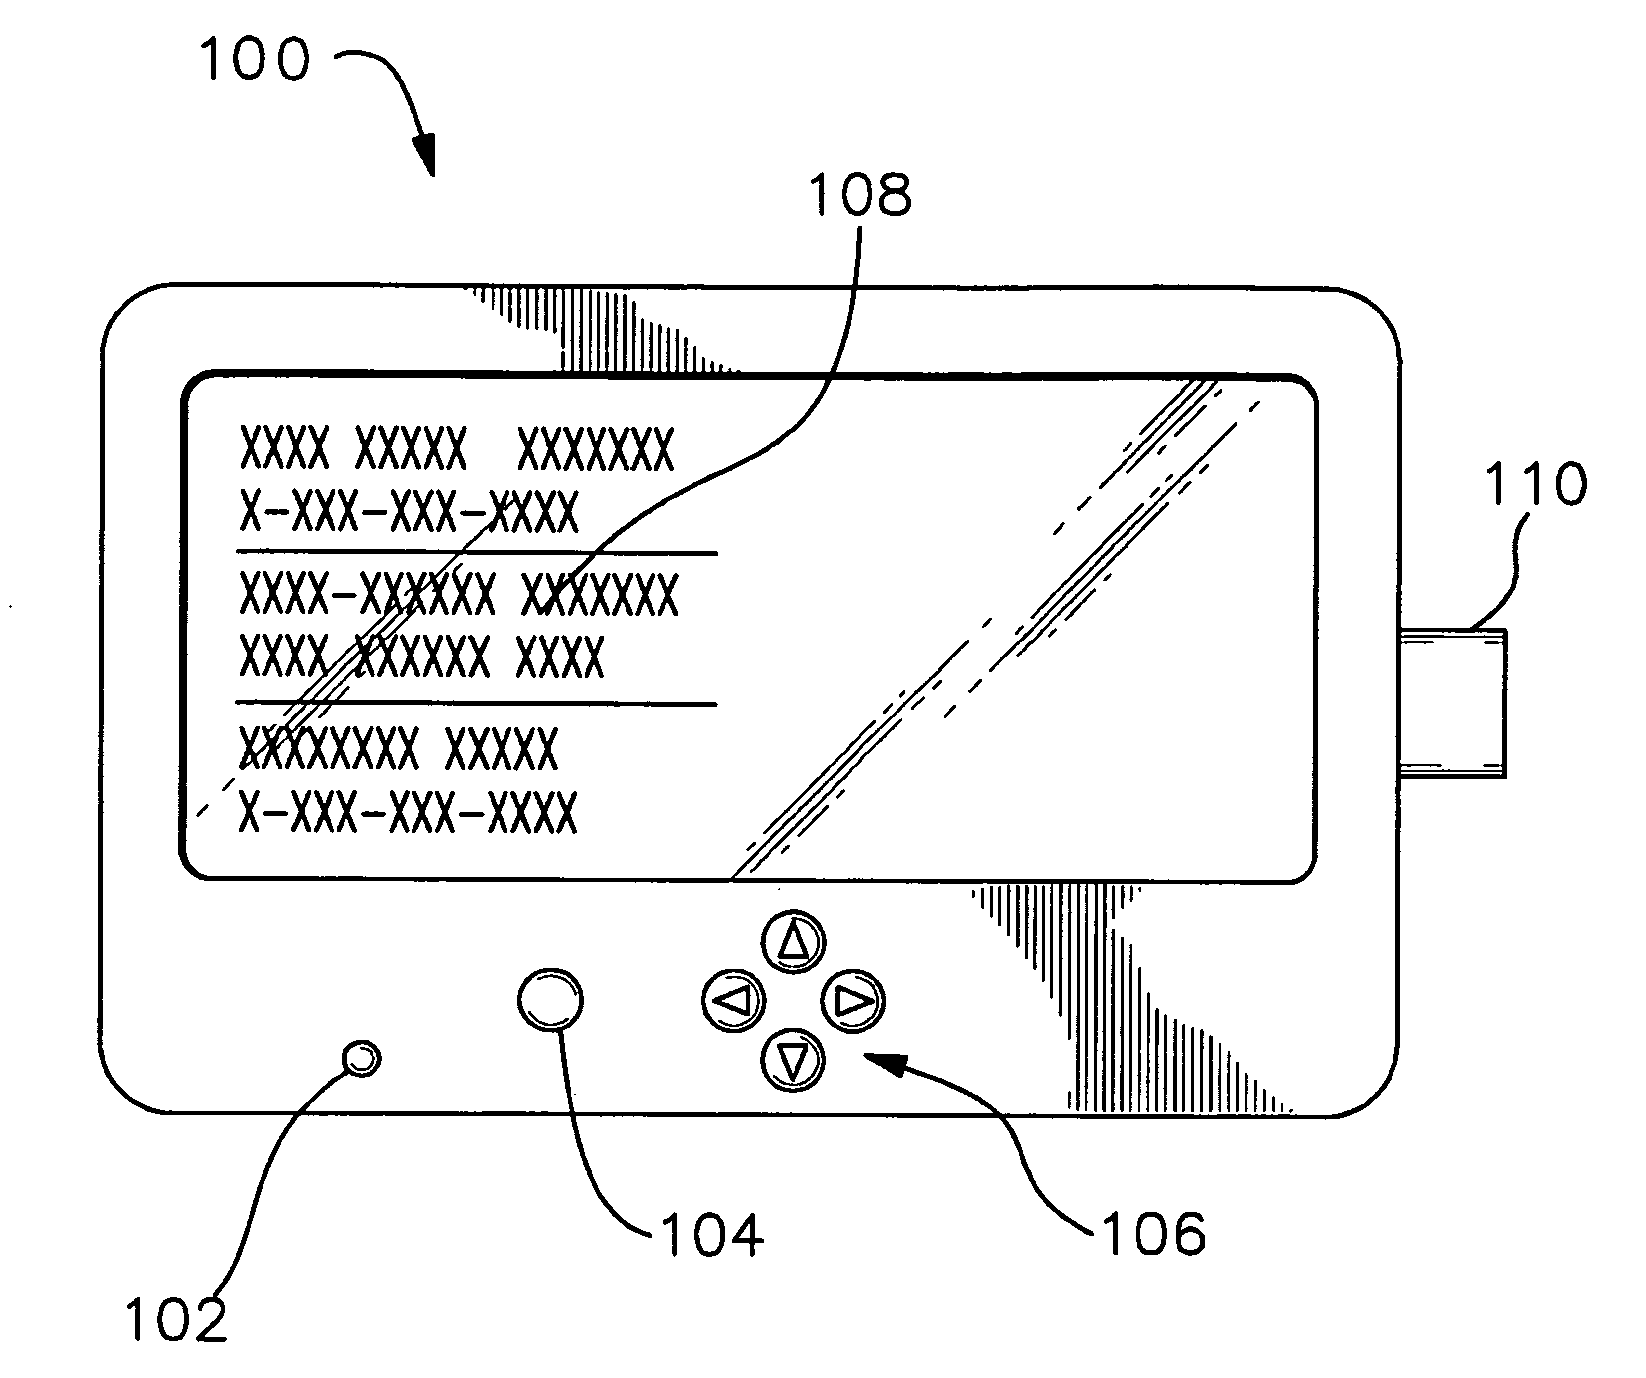 Methods and apparatus for digital audio, video, and data player and recorder and business method of managing medical information on a branded data storage device